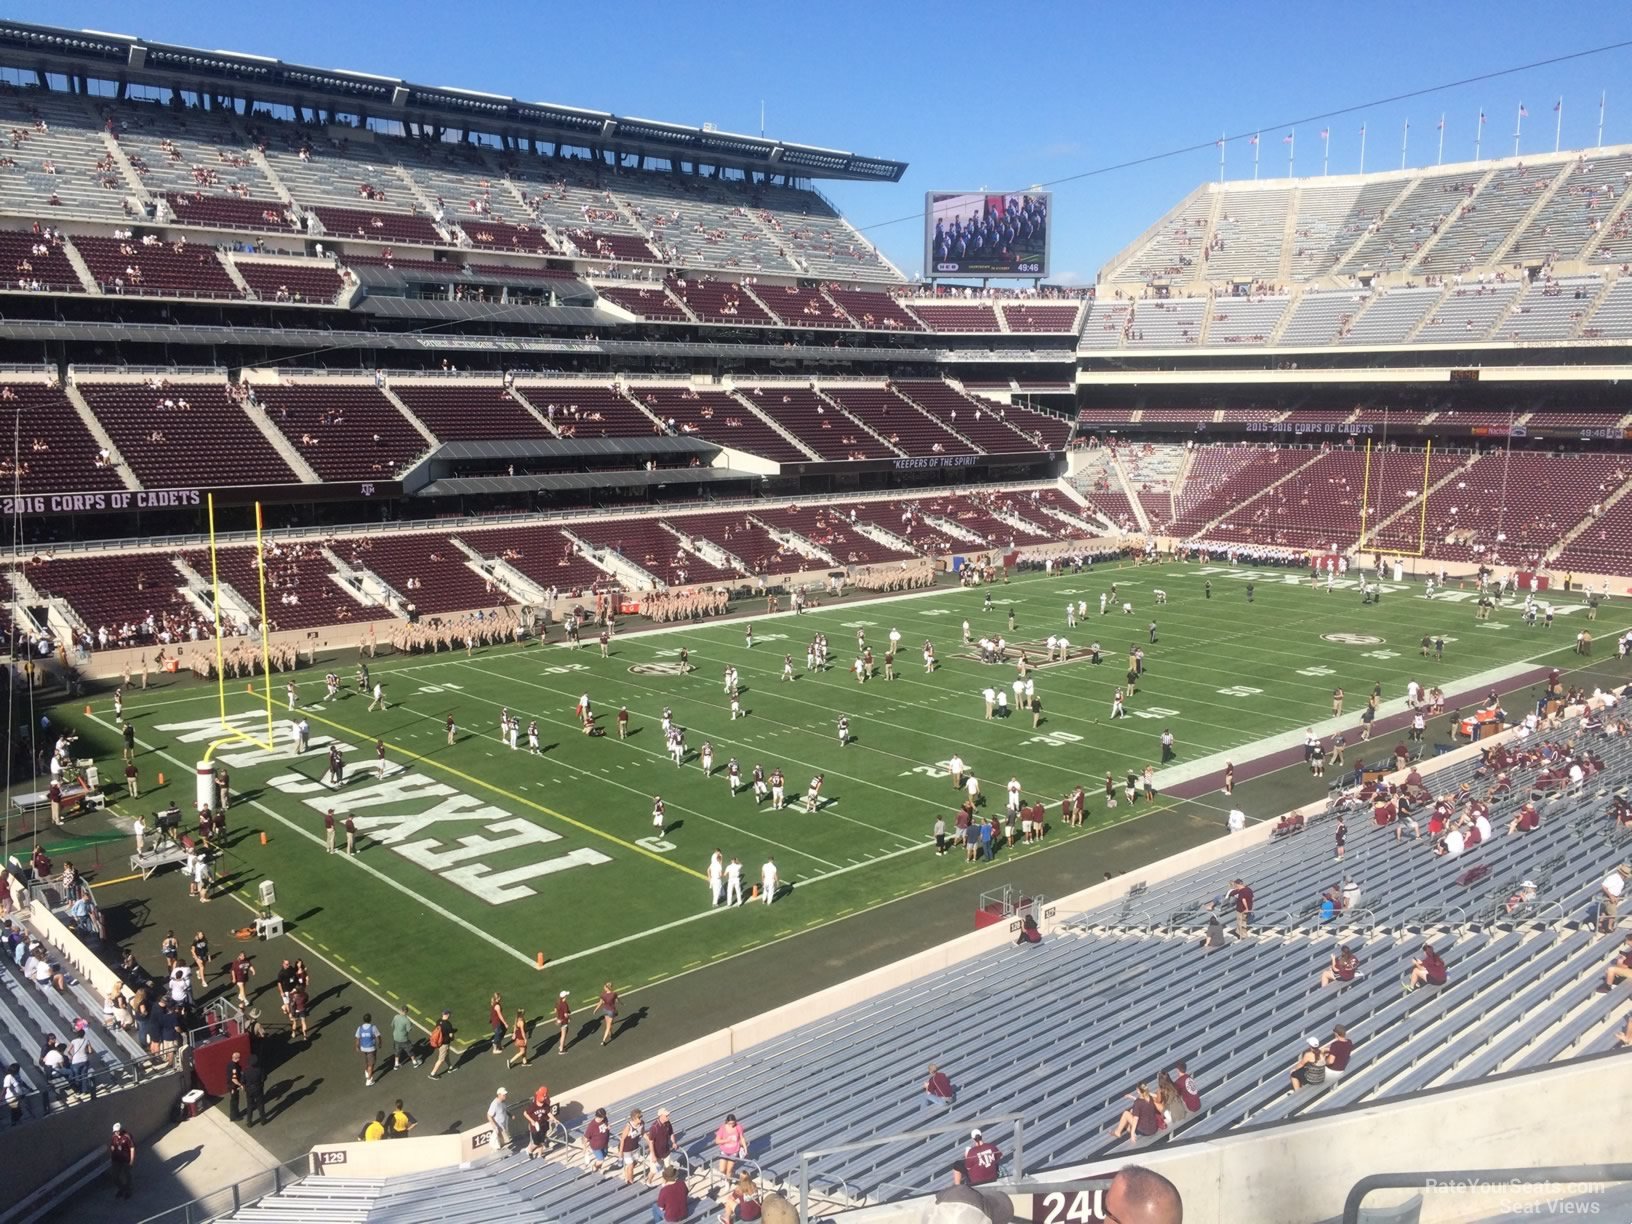 section 240, row 7 seat view  - kyle field